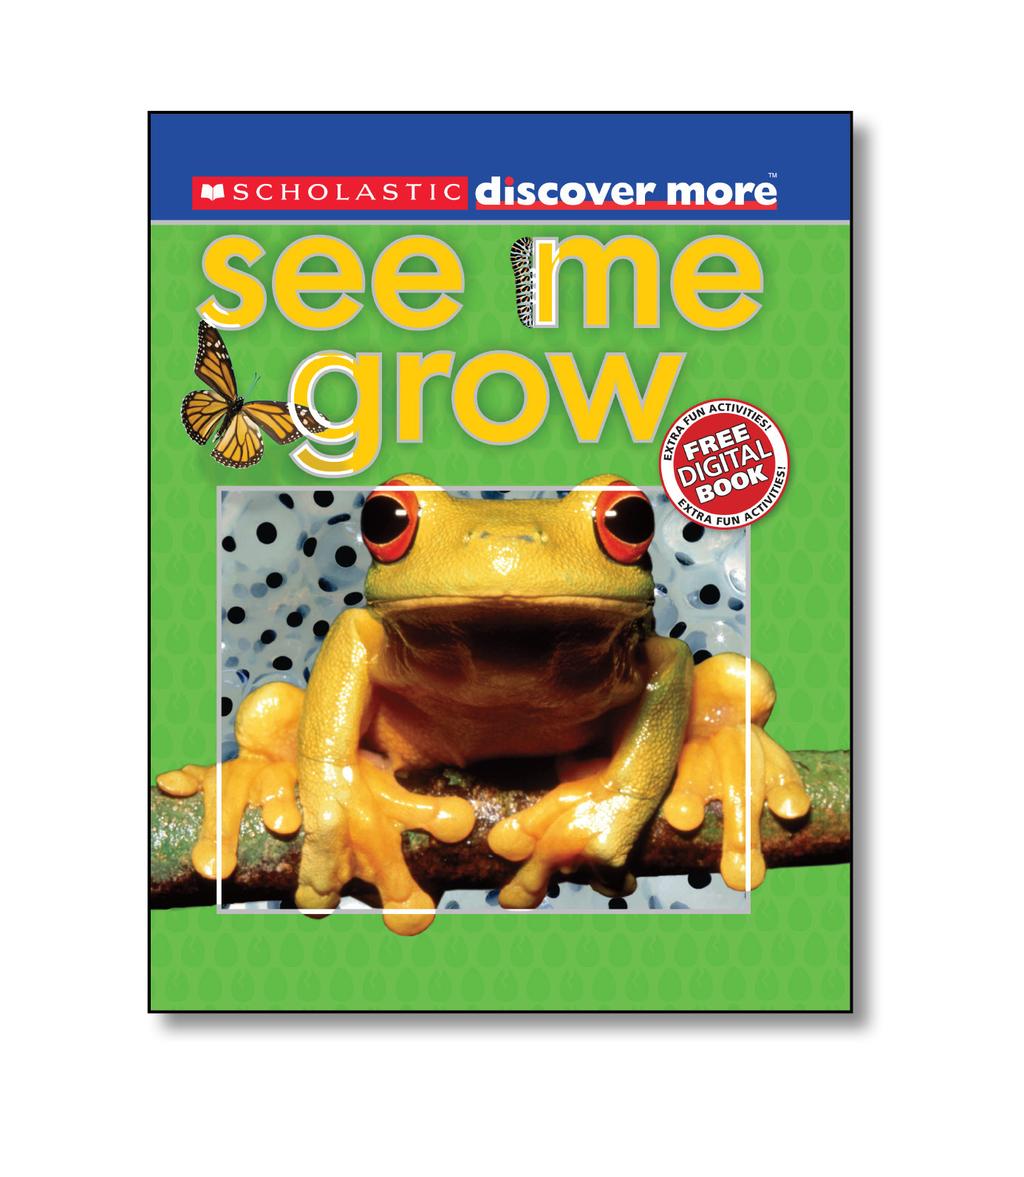 BOOK STATS Grade Level Equivalent: K 3 Ages: 5+ Lexile Measure : 640L Pages: 32 Guided Reading Level: K Genre: Informational Subject/Theme: Animal Growth, Life Cycles Common Core State Standards